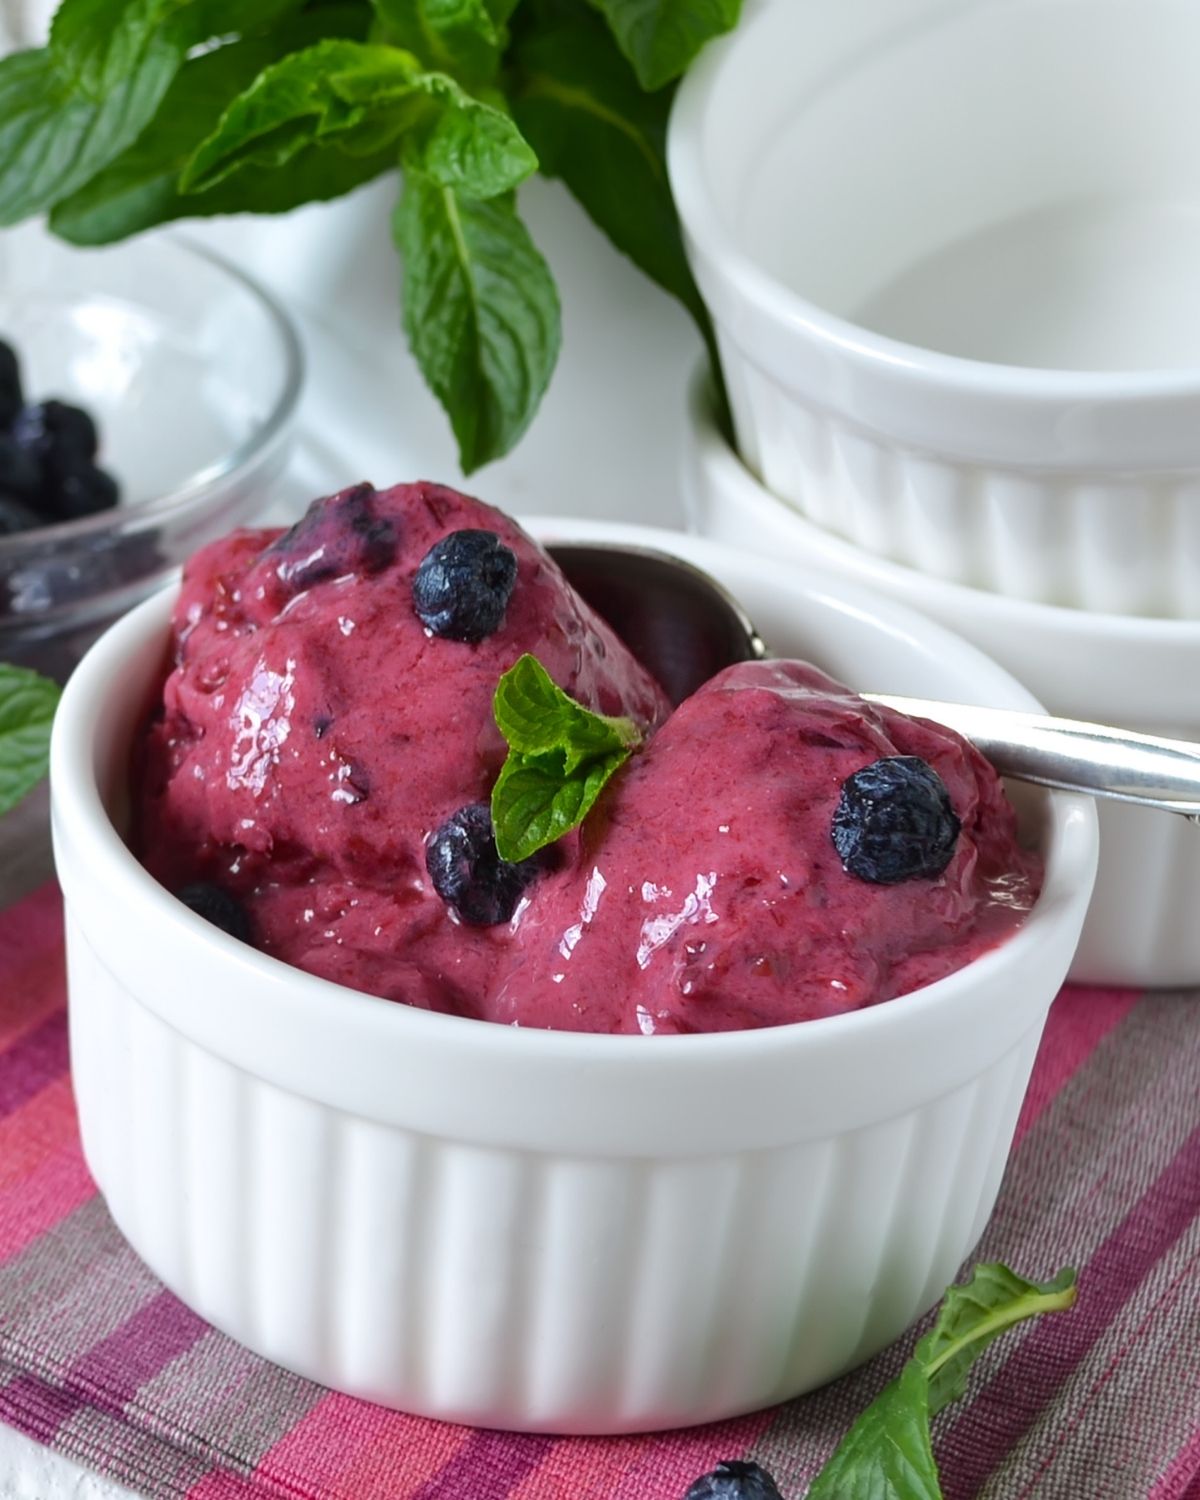 Watermelon Blueberry Sorbet with a garnish of mint leaves.